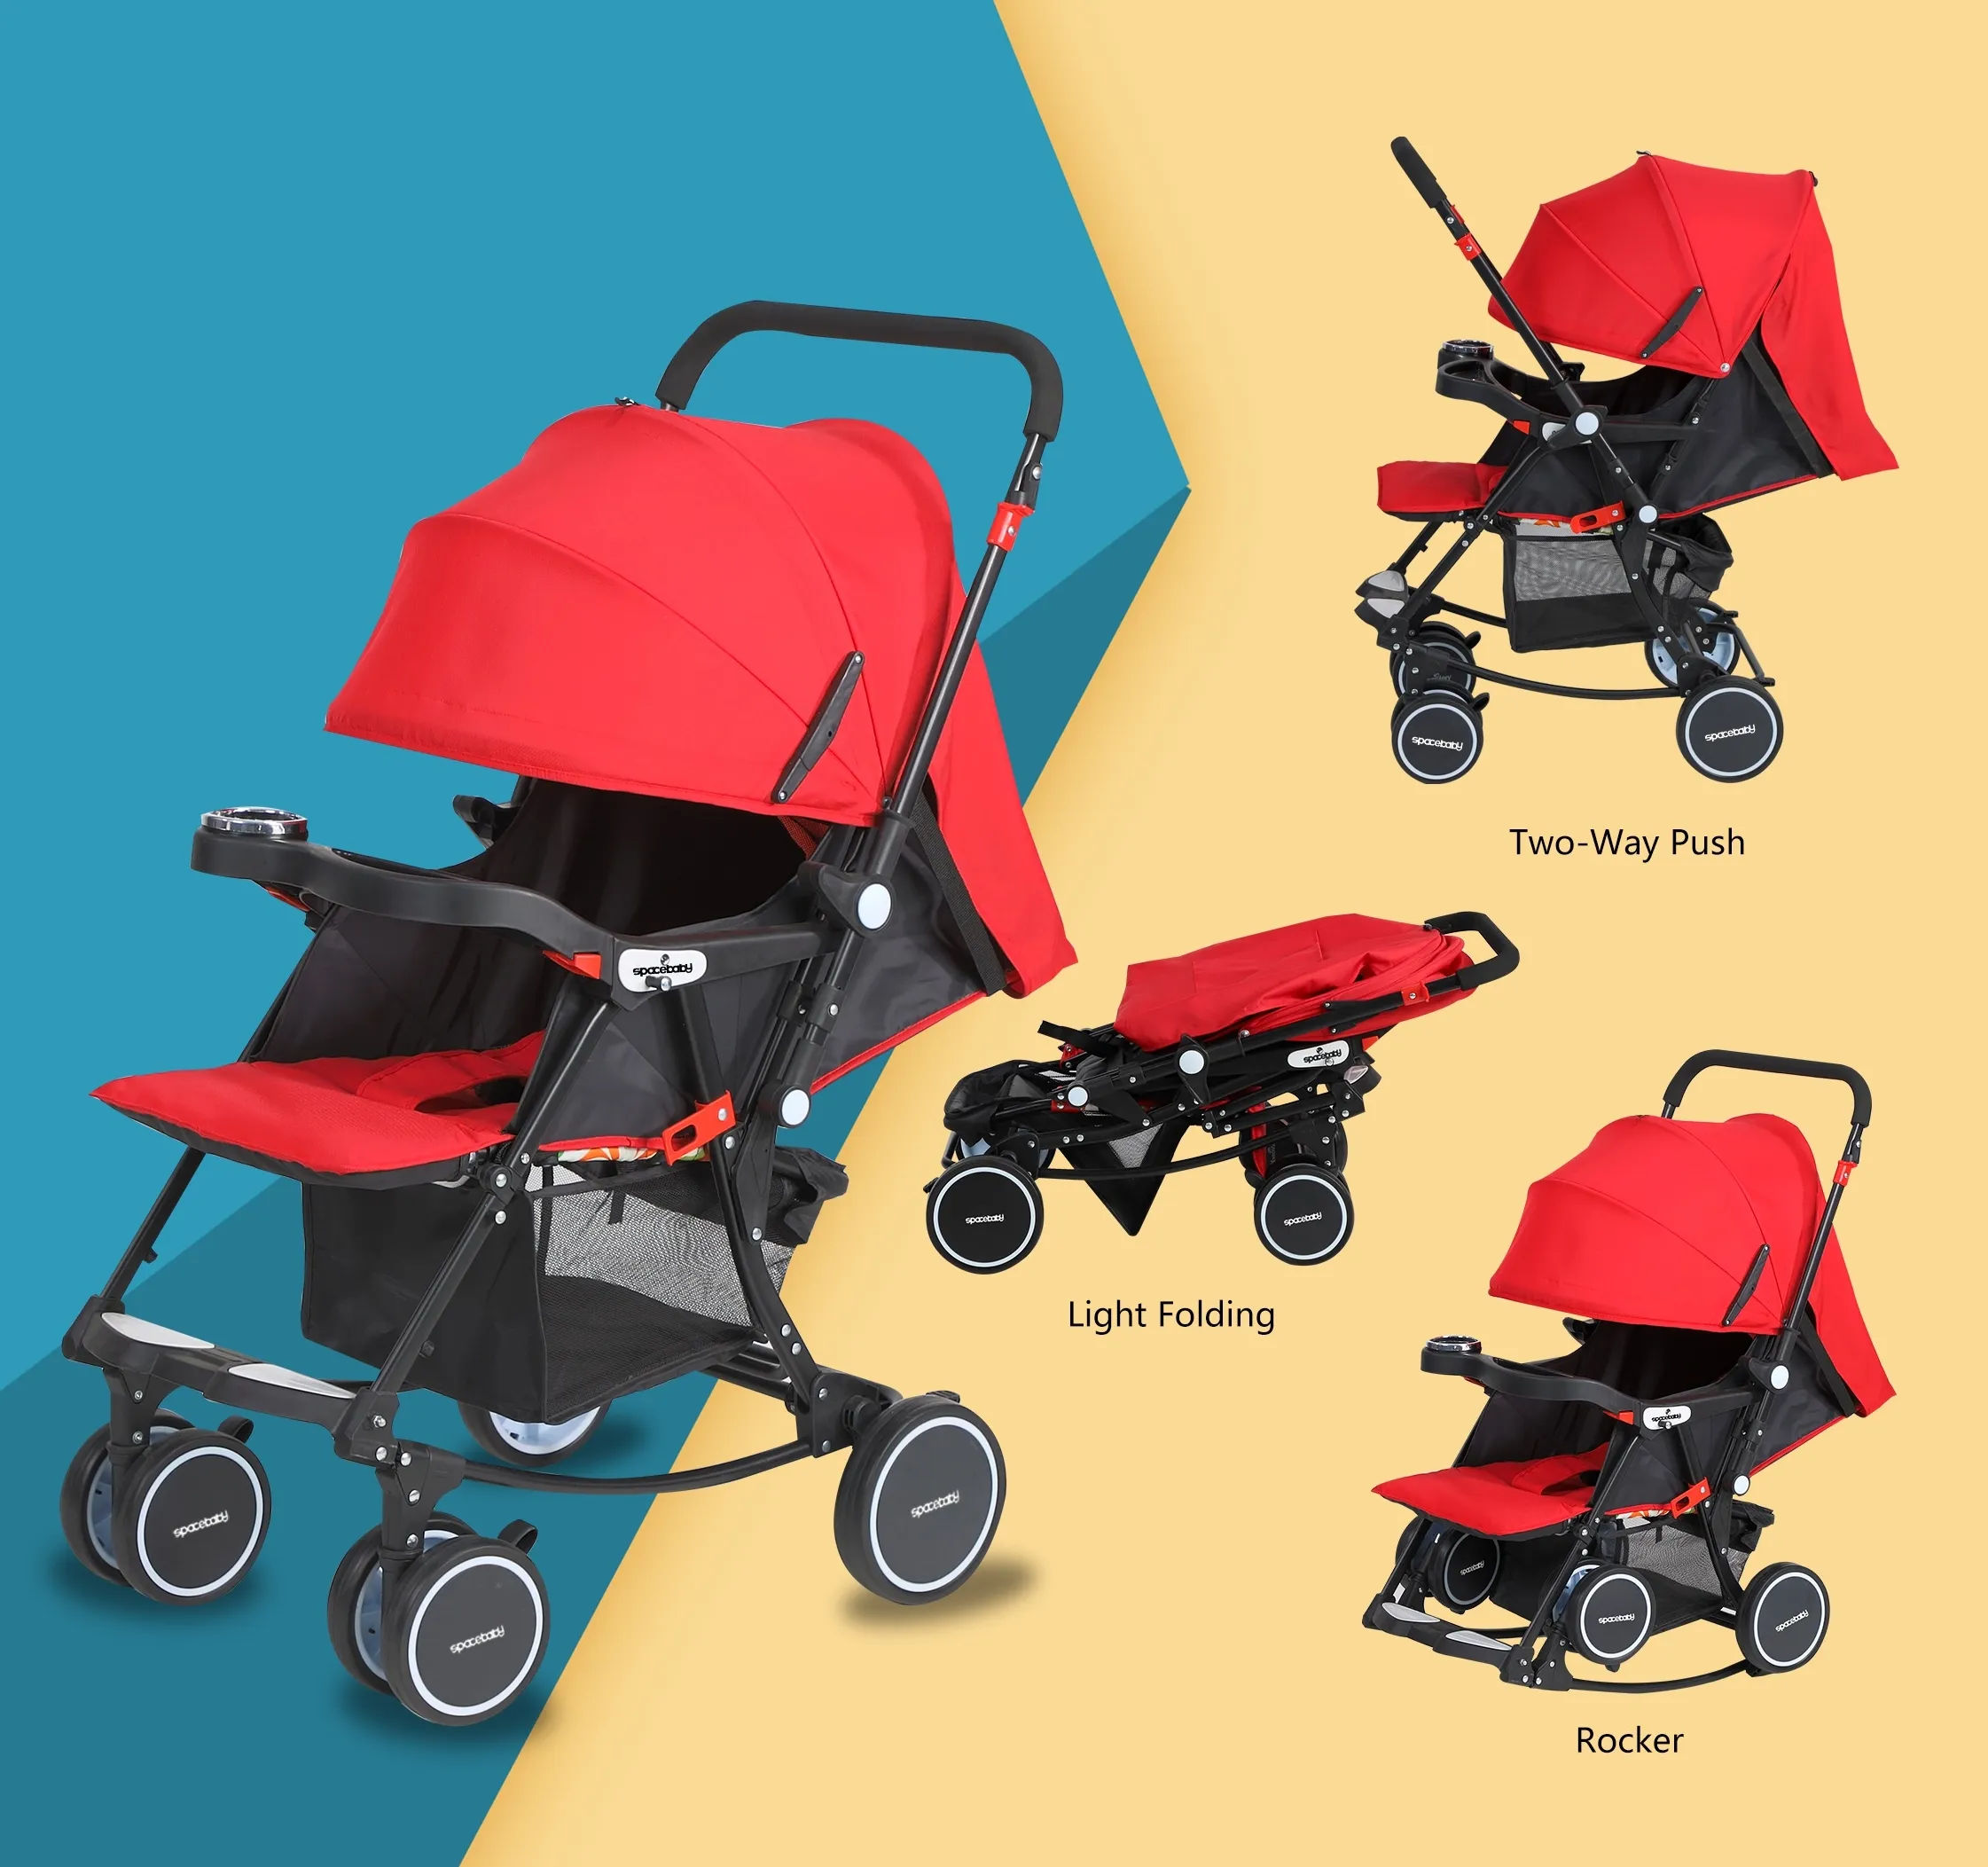 Two-way stroller variable rocking chair with dinner plate/Sit-and-lie outdoor portable foldable cheap trolley with awning